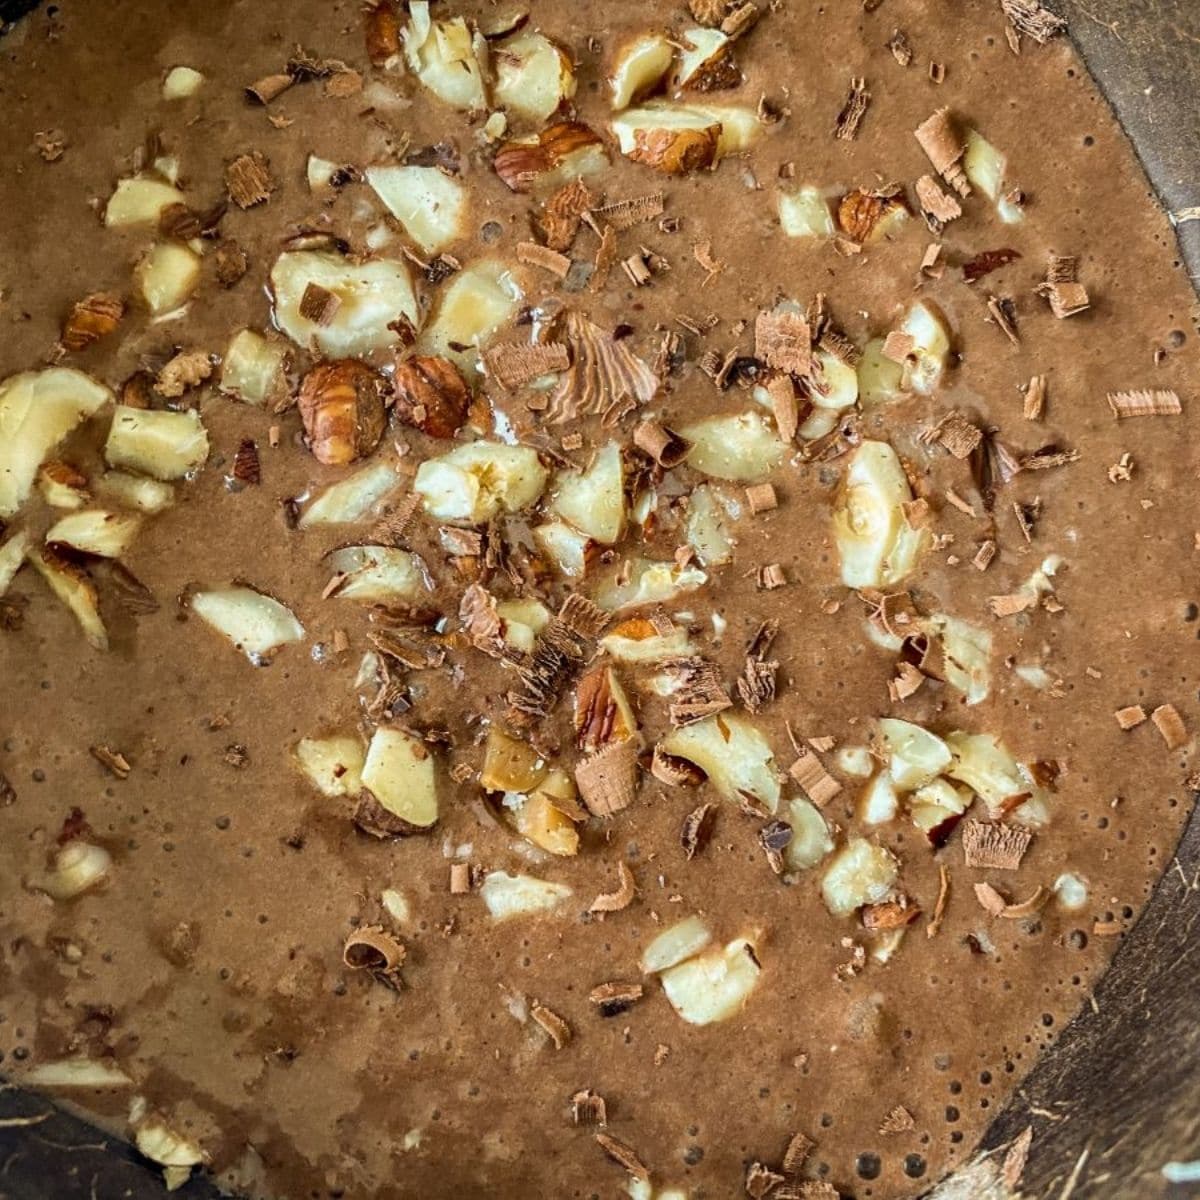 hazelnuts pieces on top of chocolate smoothie